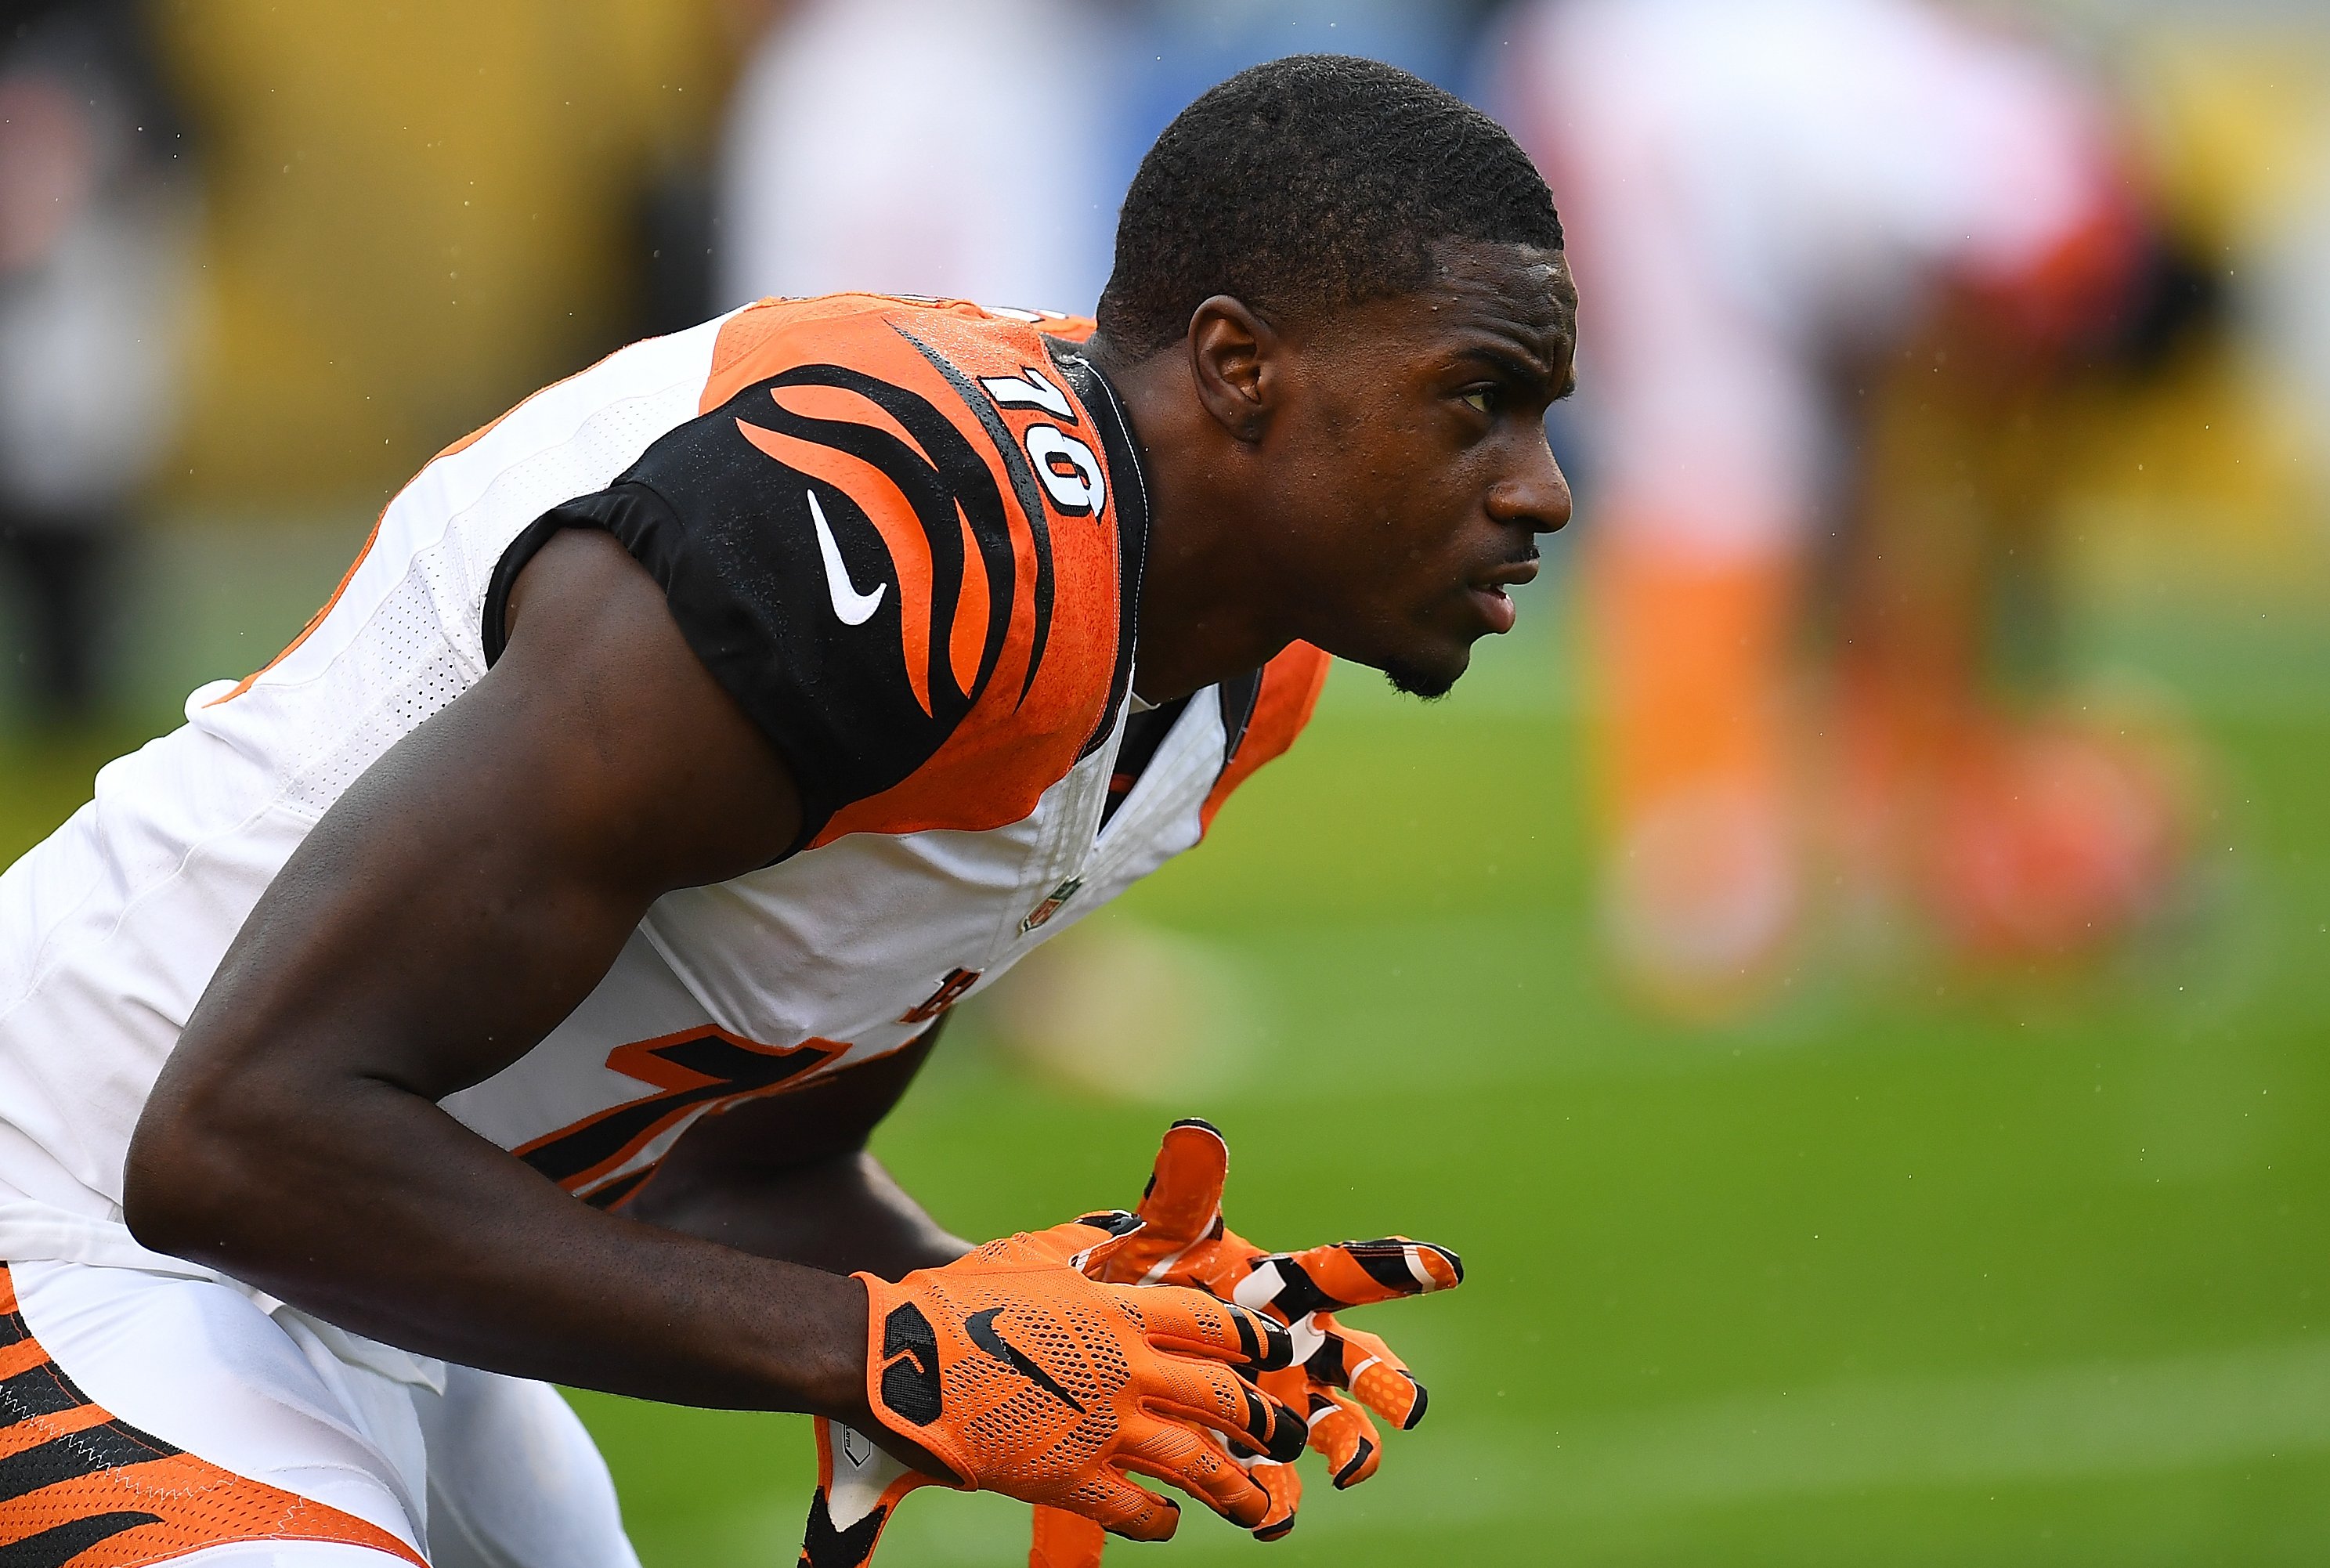 AJ Green is back and he says he feels better than ever